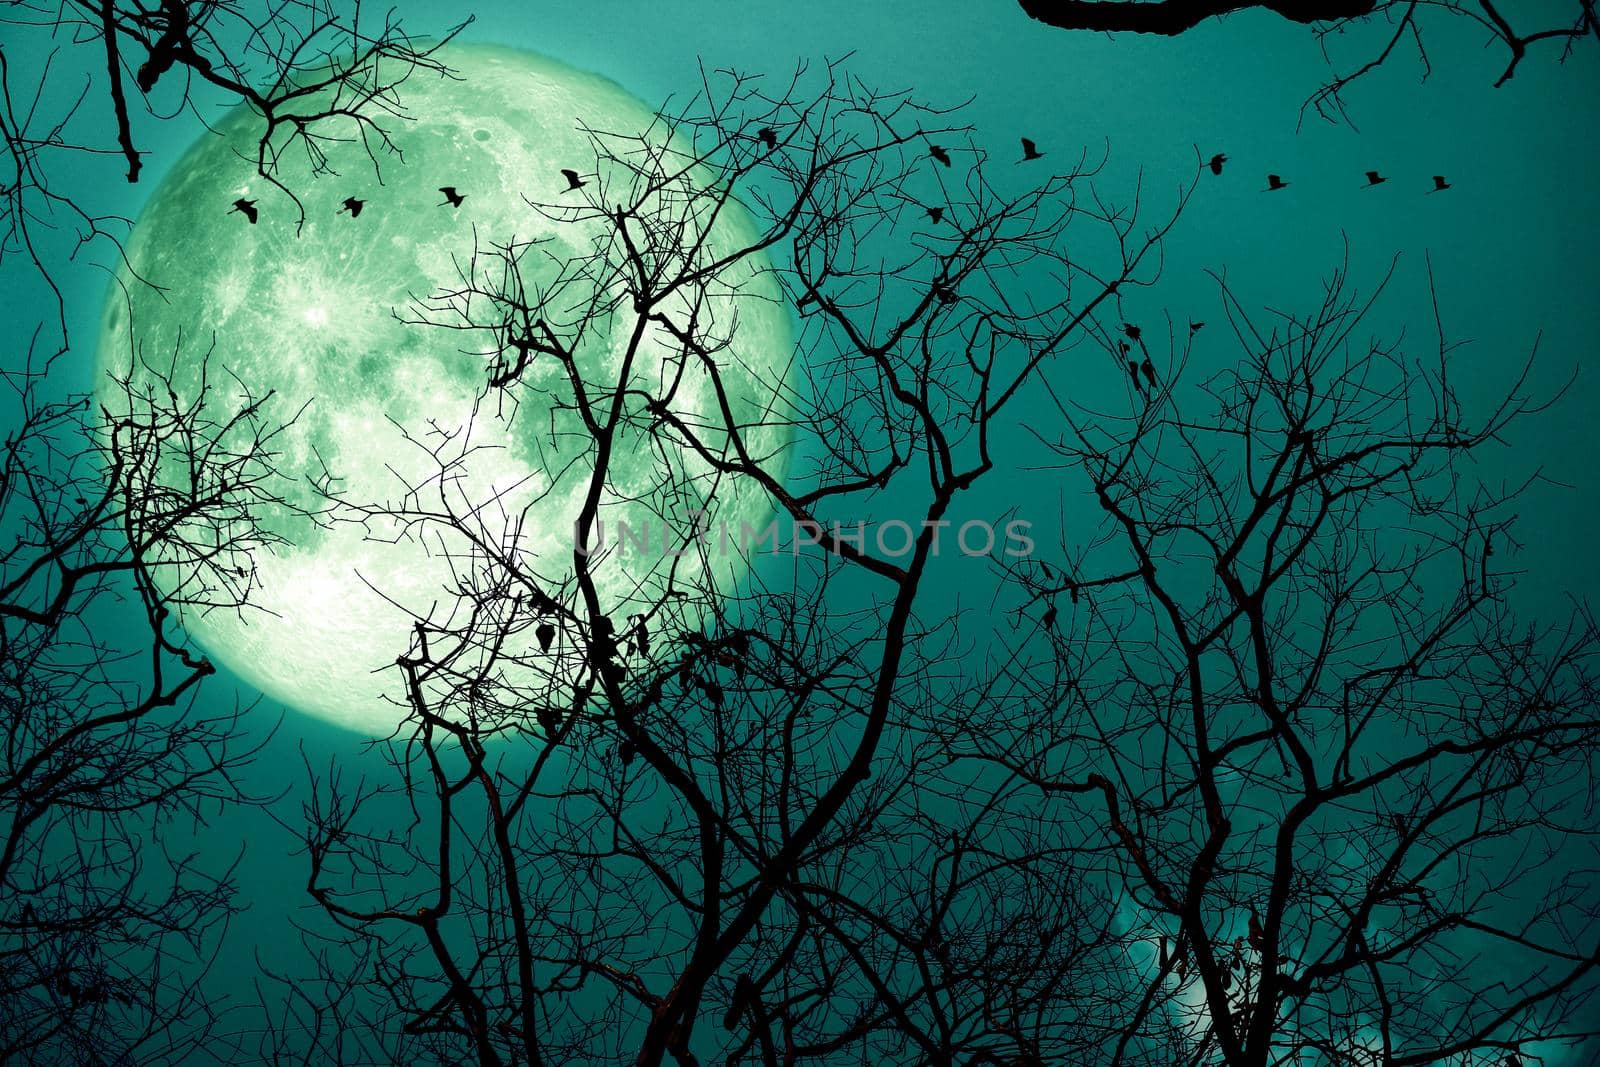 super sturgeon green moon and silhouette birds in the night sky, Elements of this image furnished by NASA